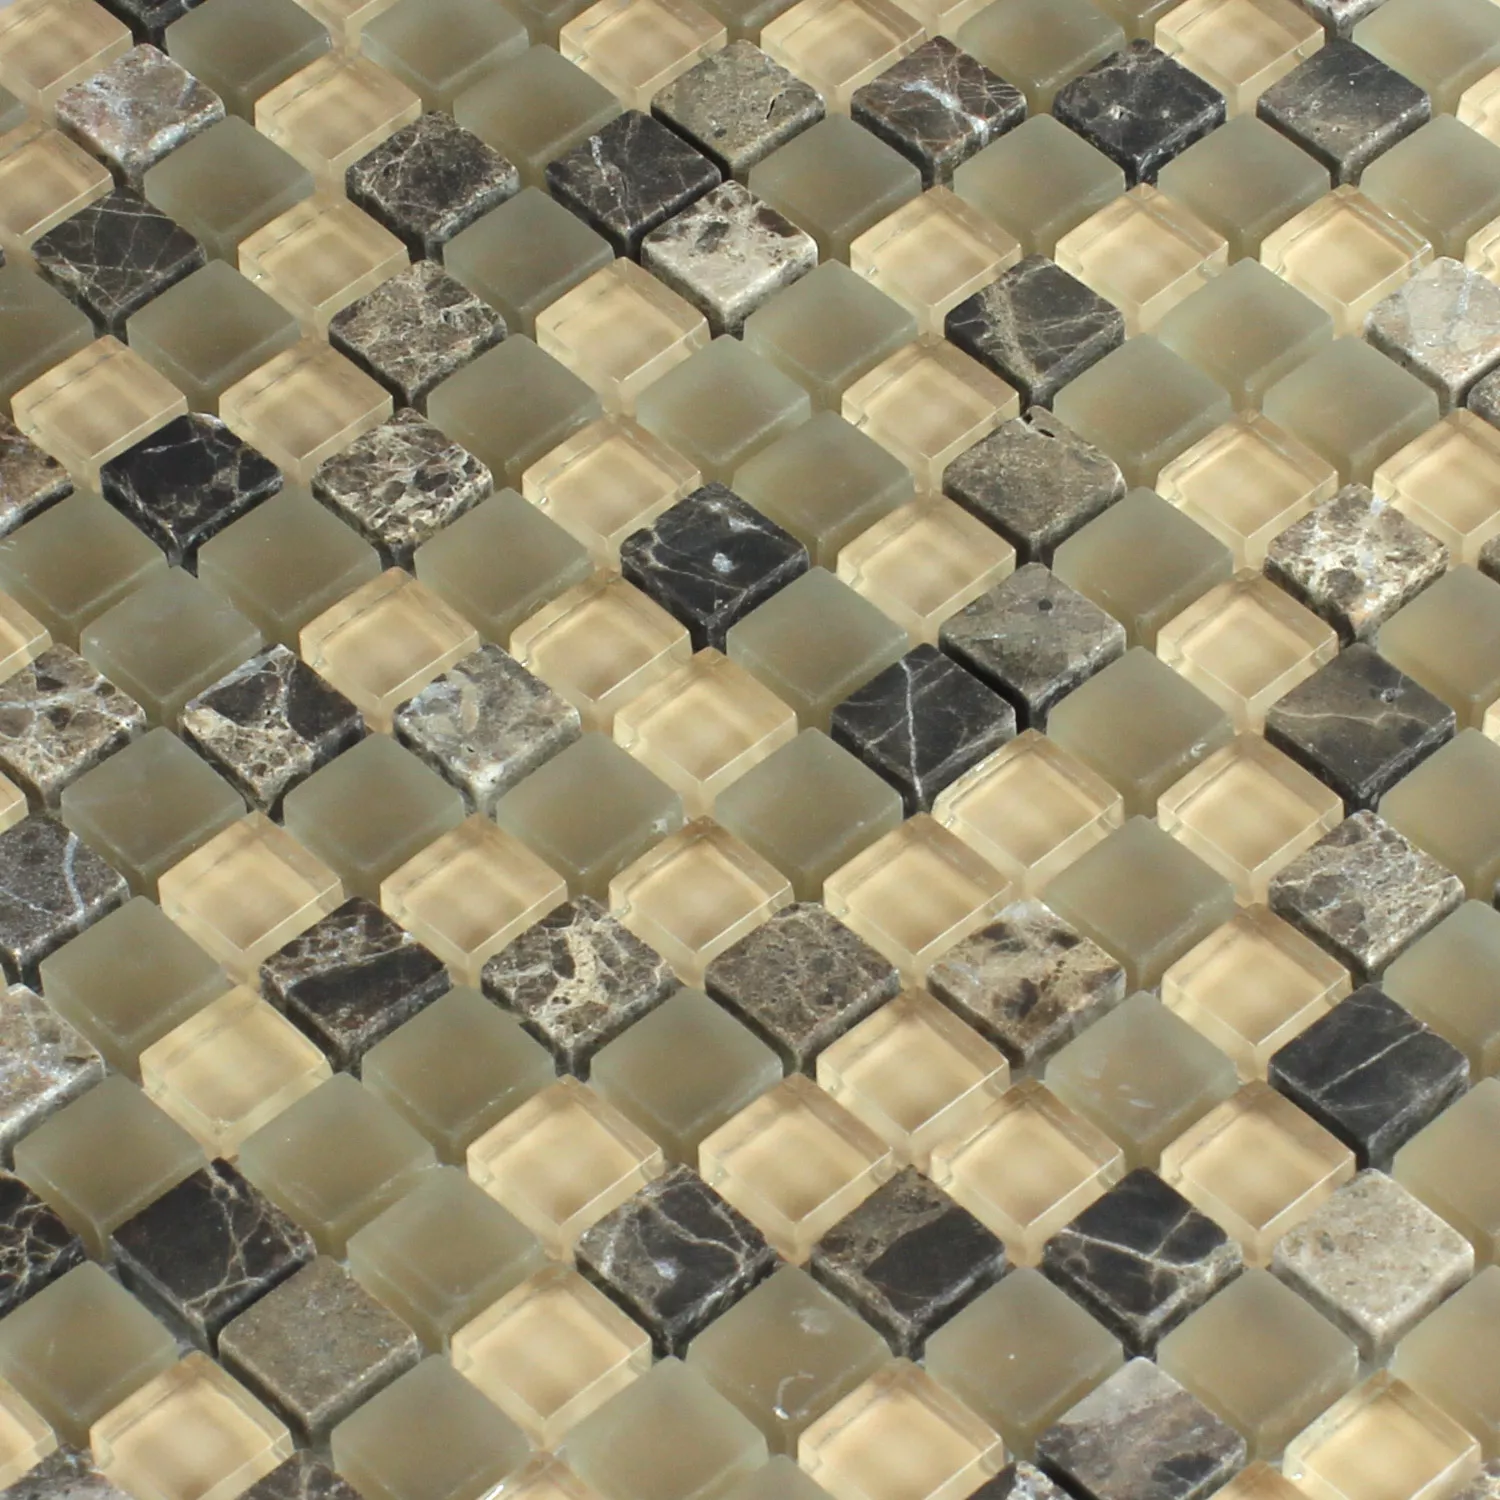 Sample Mosaic Tiles Glass Marble  Brown Beige Mix